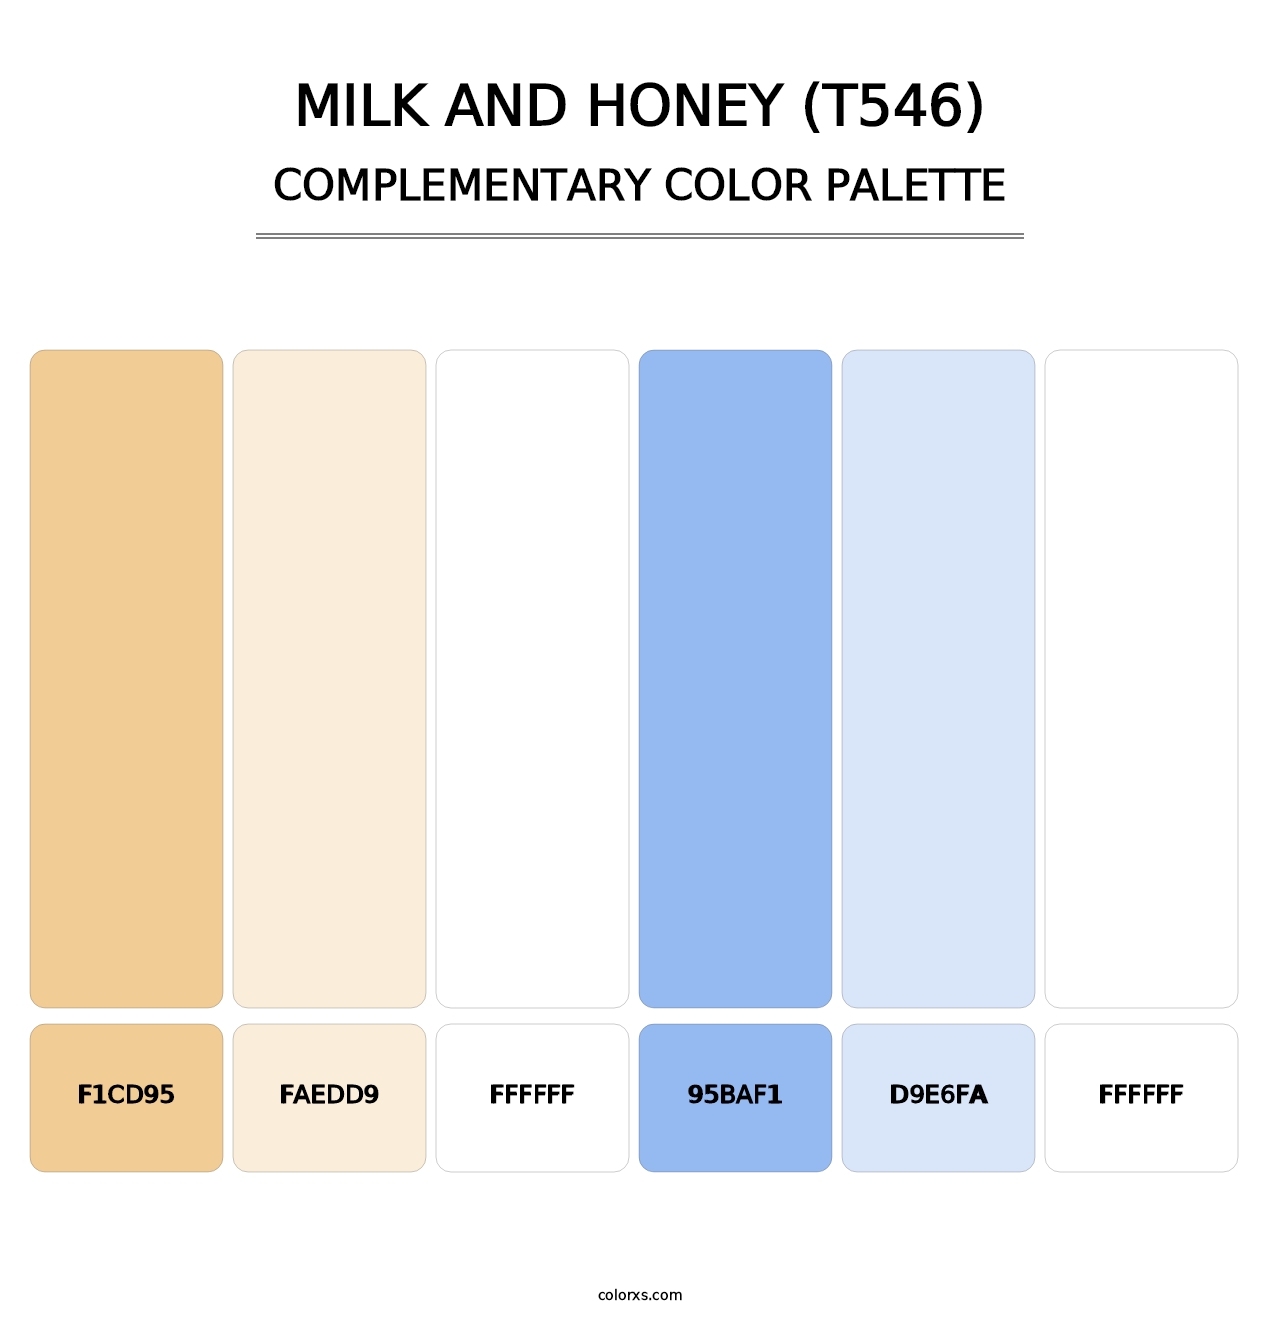 Milk and Honey (T546) - Complementary Color Palette